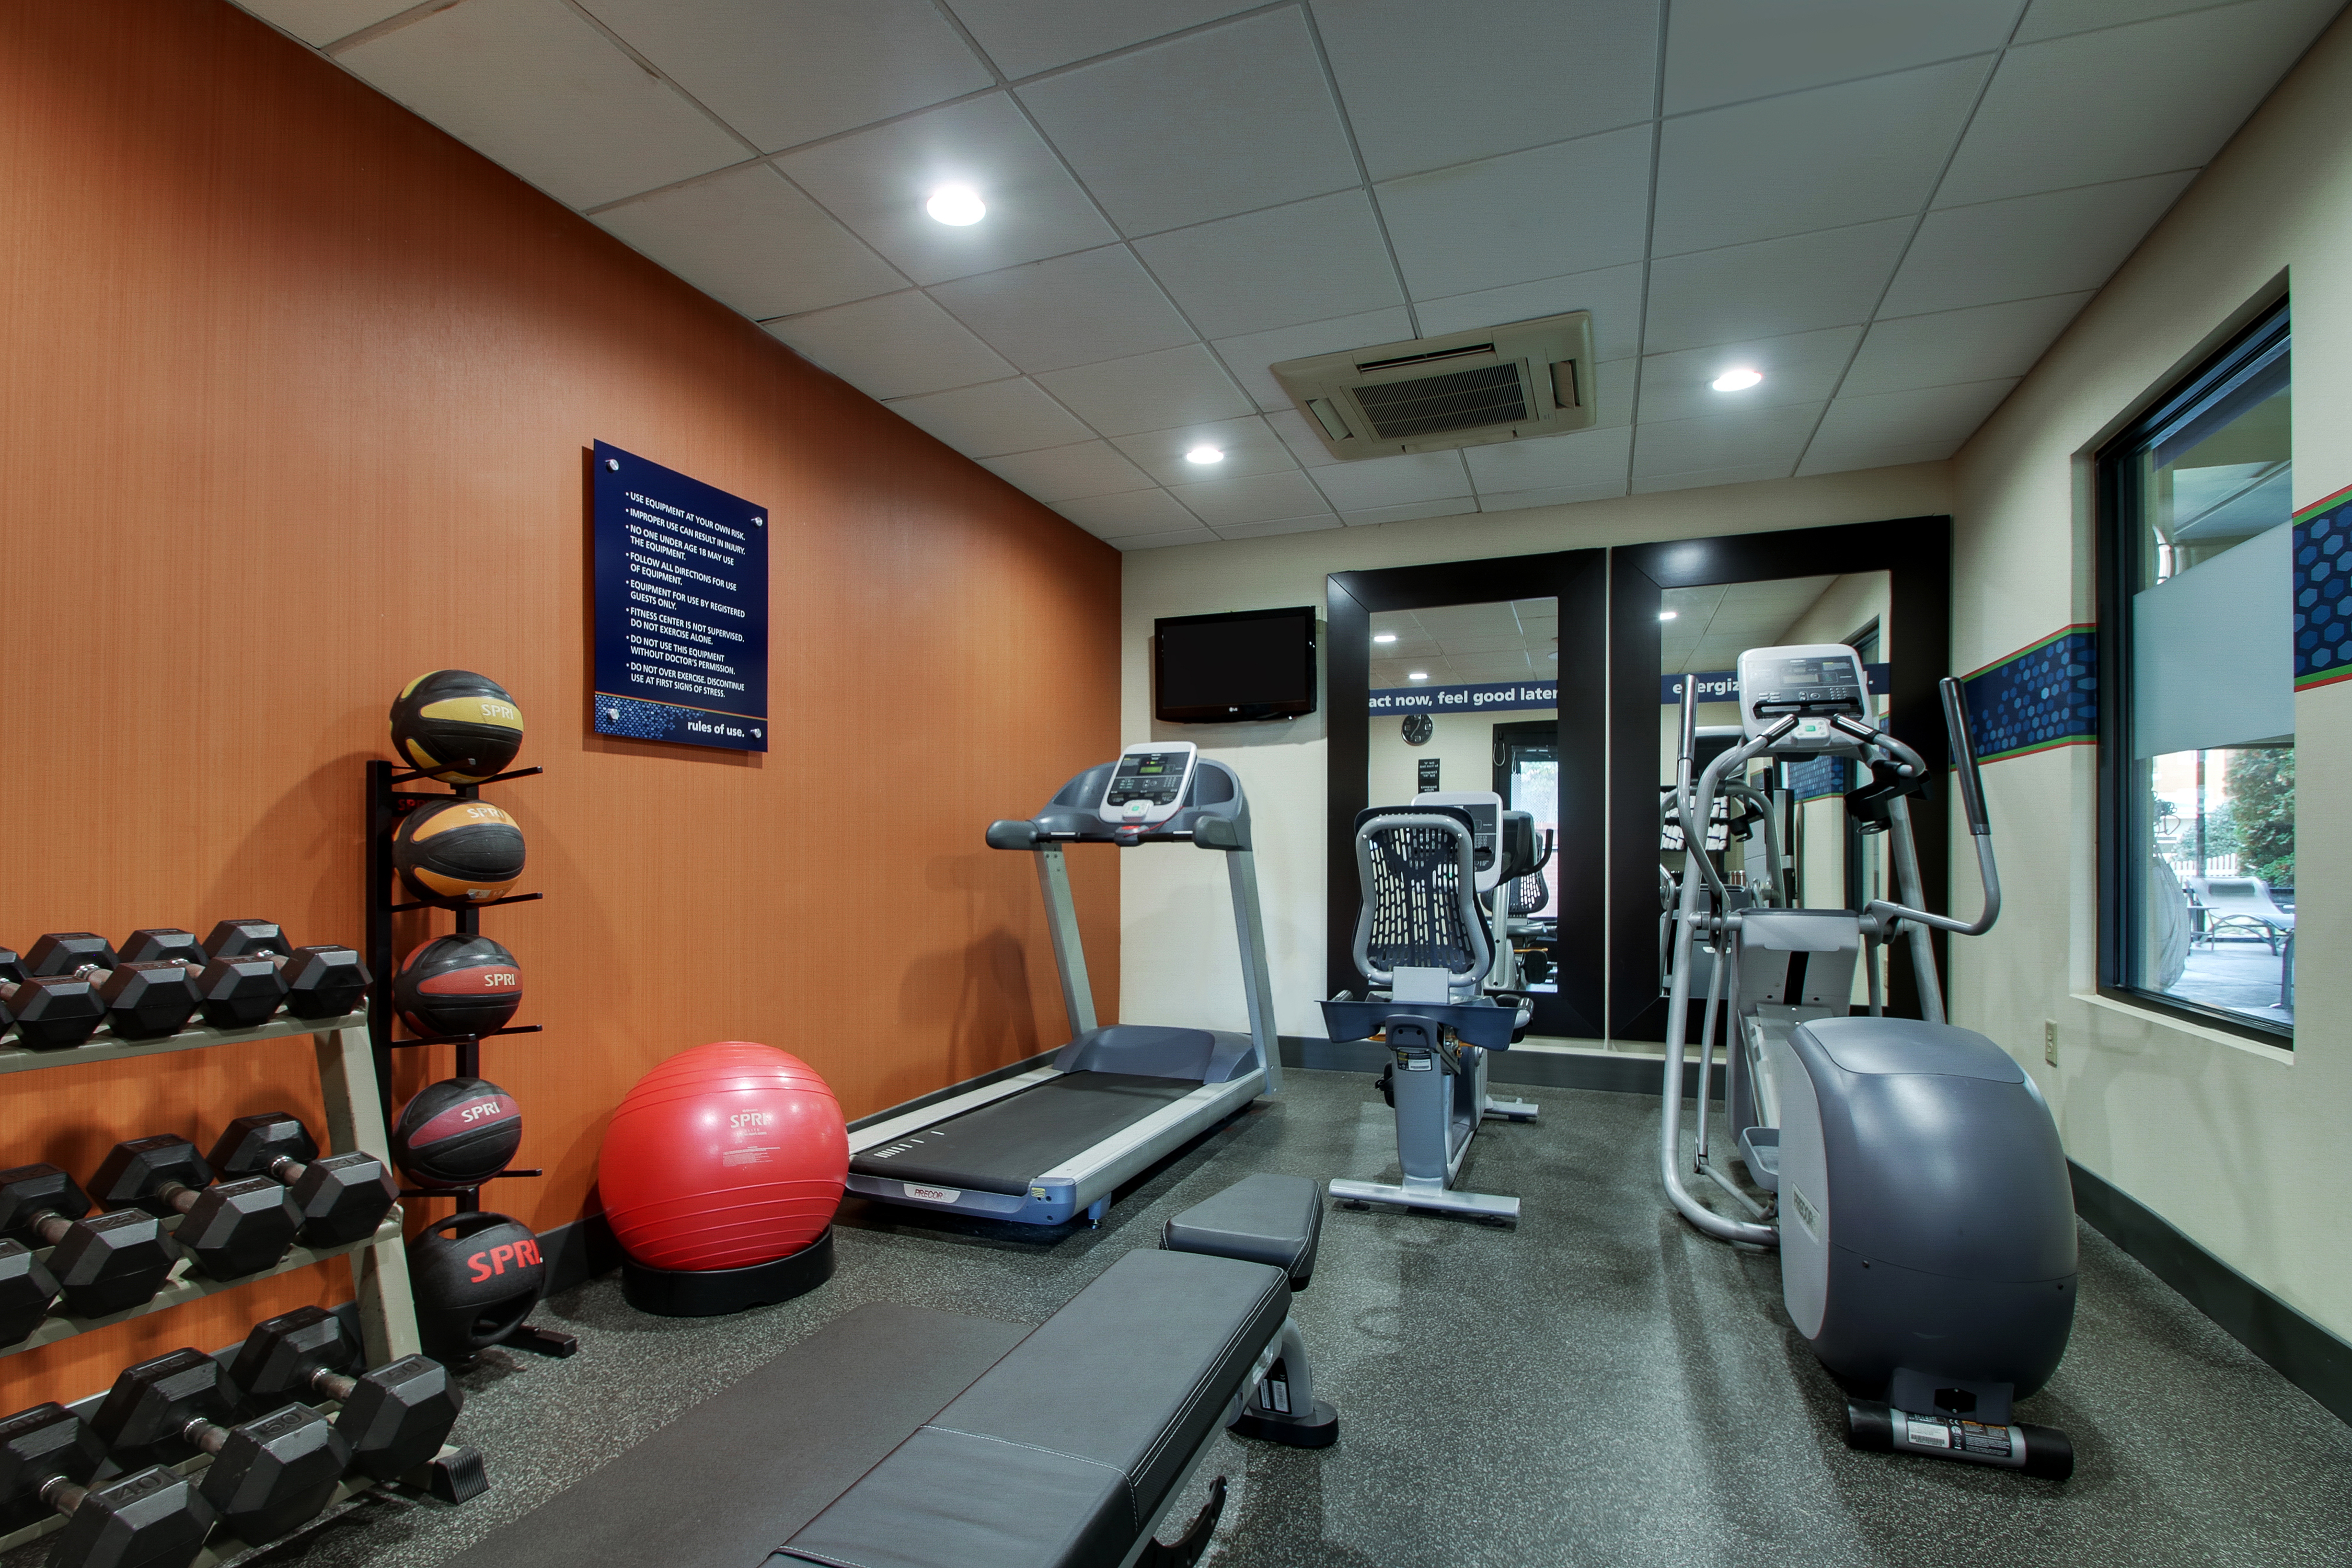 Fitness Center with Treadmill, Cycle Machine, Cross-Trainer, Weight Bench, Gym Ball, Medicine Ball Rack and Dumbbell Rack